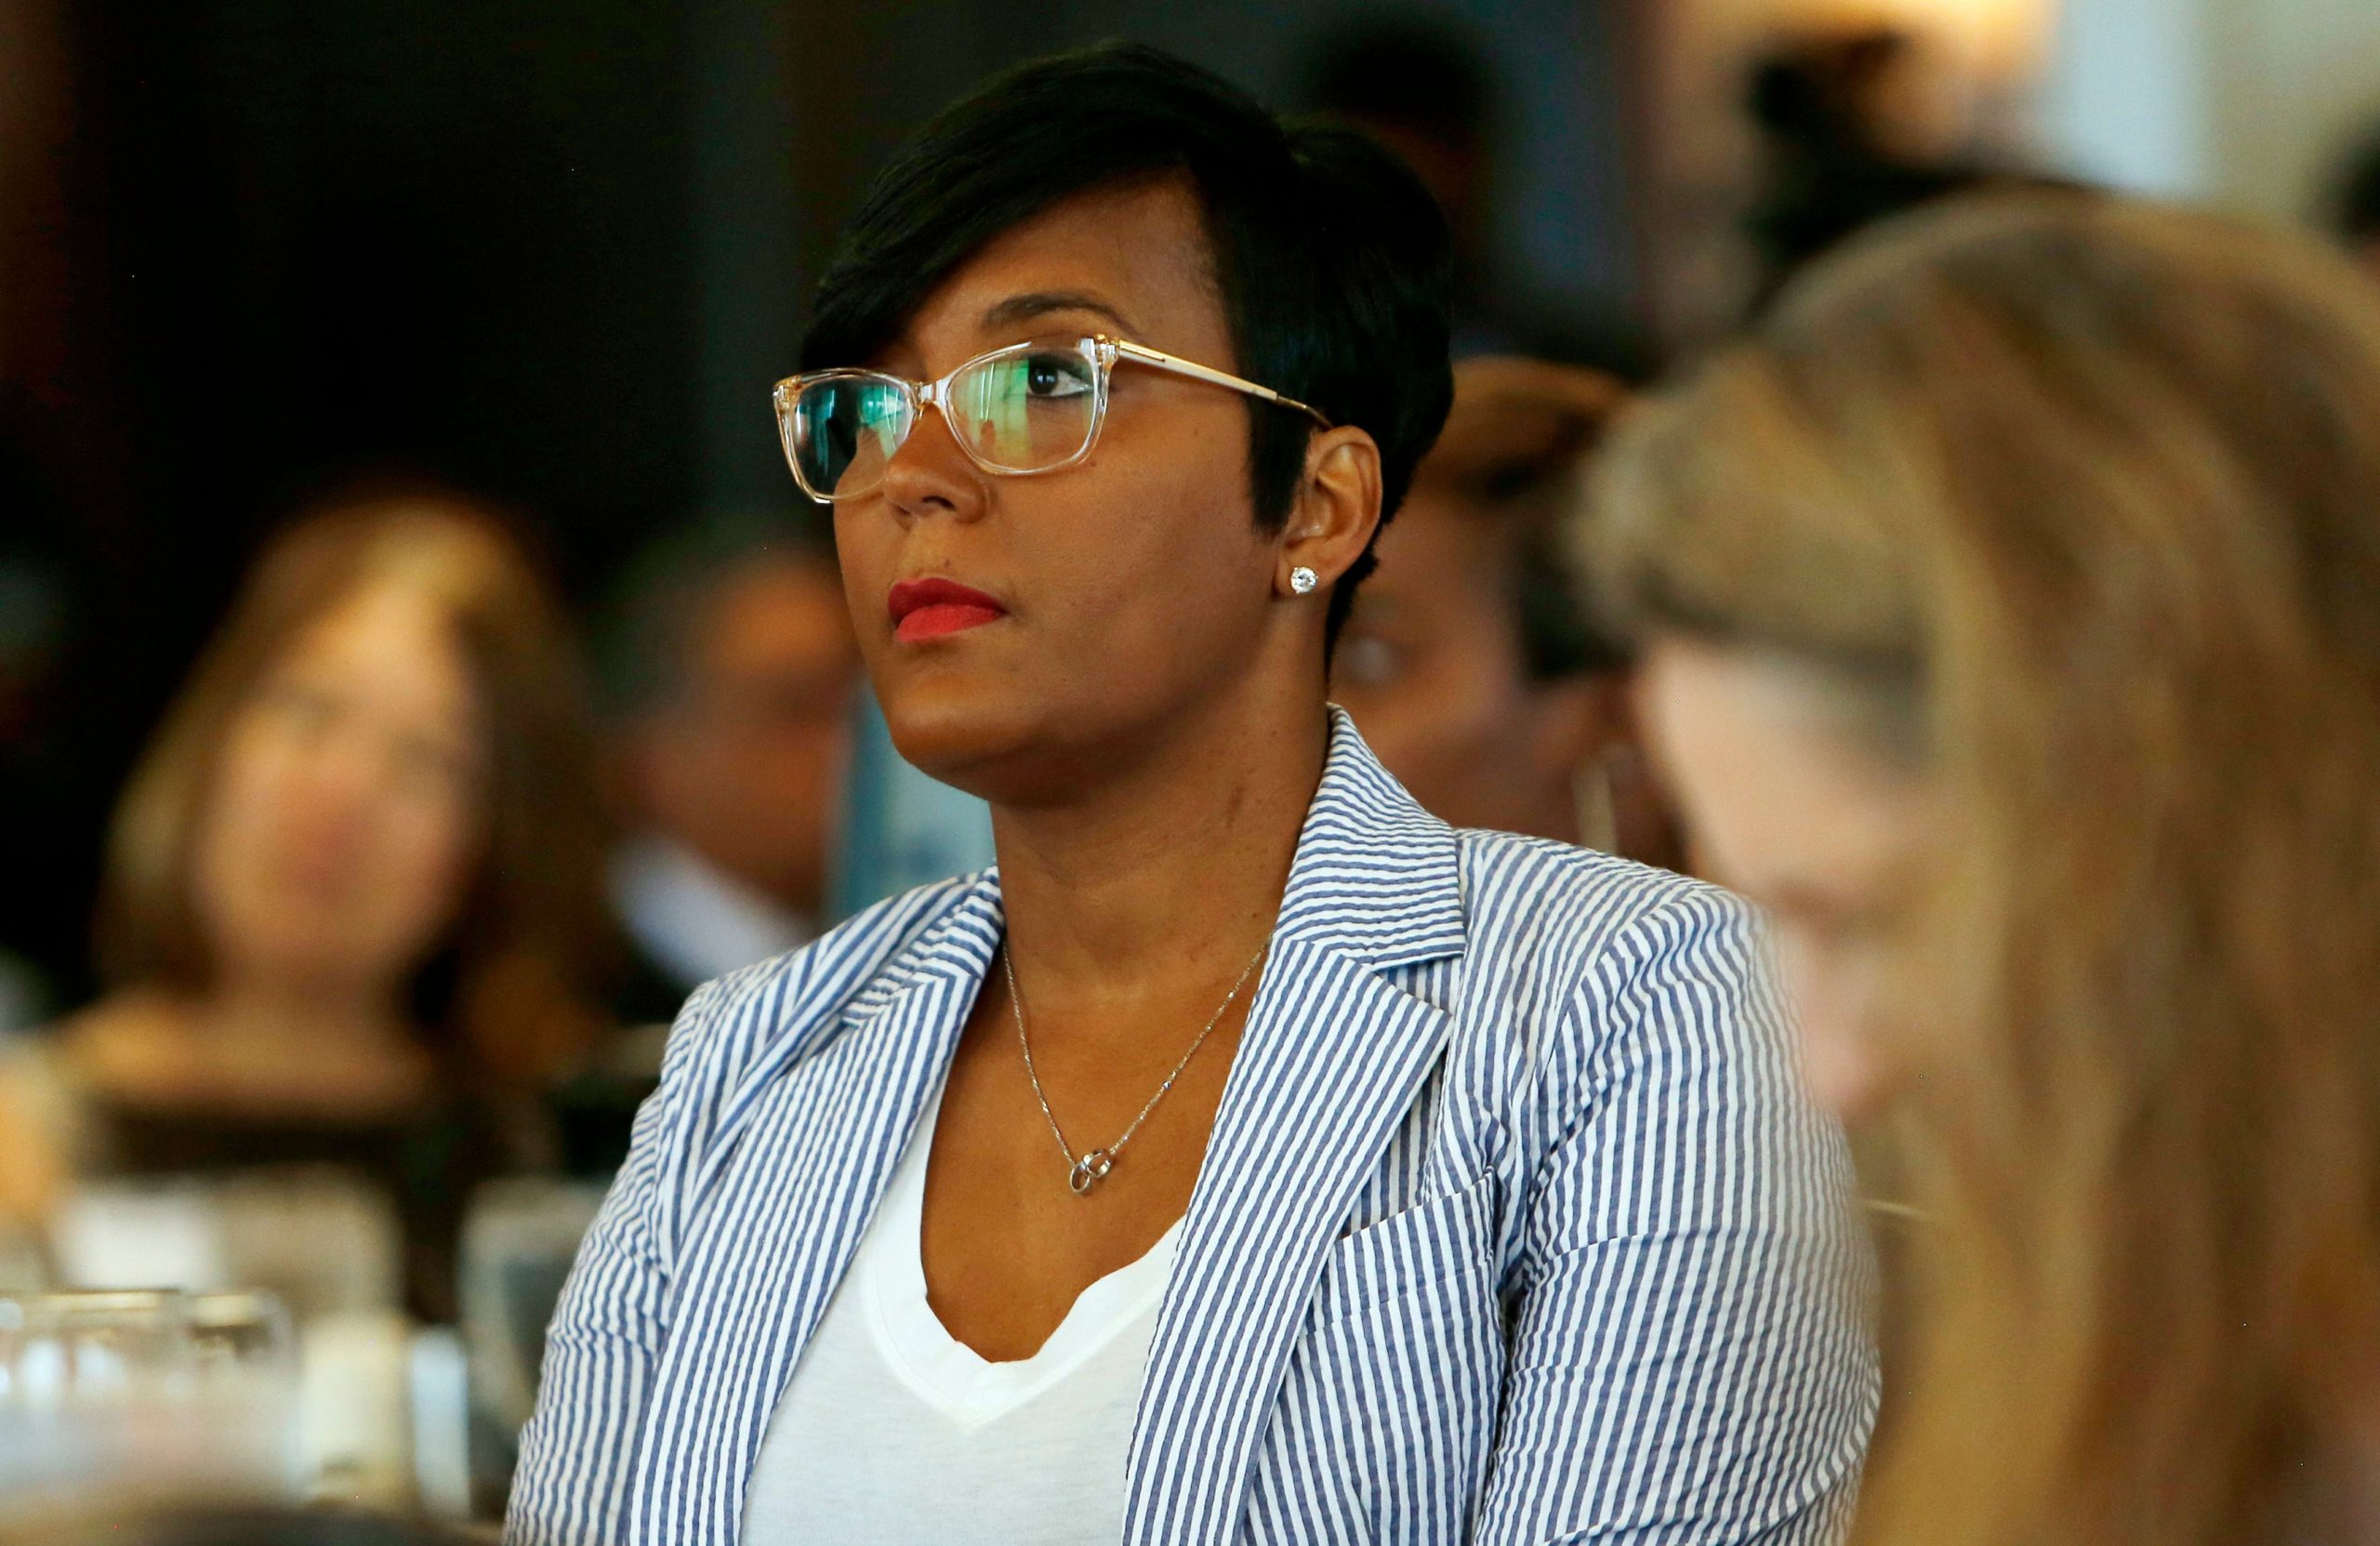 Mayor Keisha Lance Bottoms Urges People Not to Travel to Atlanta for All-Star Weekend